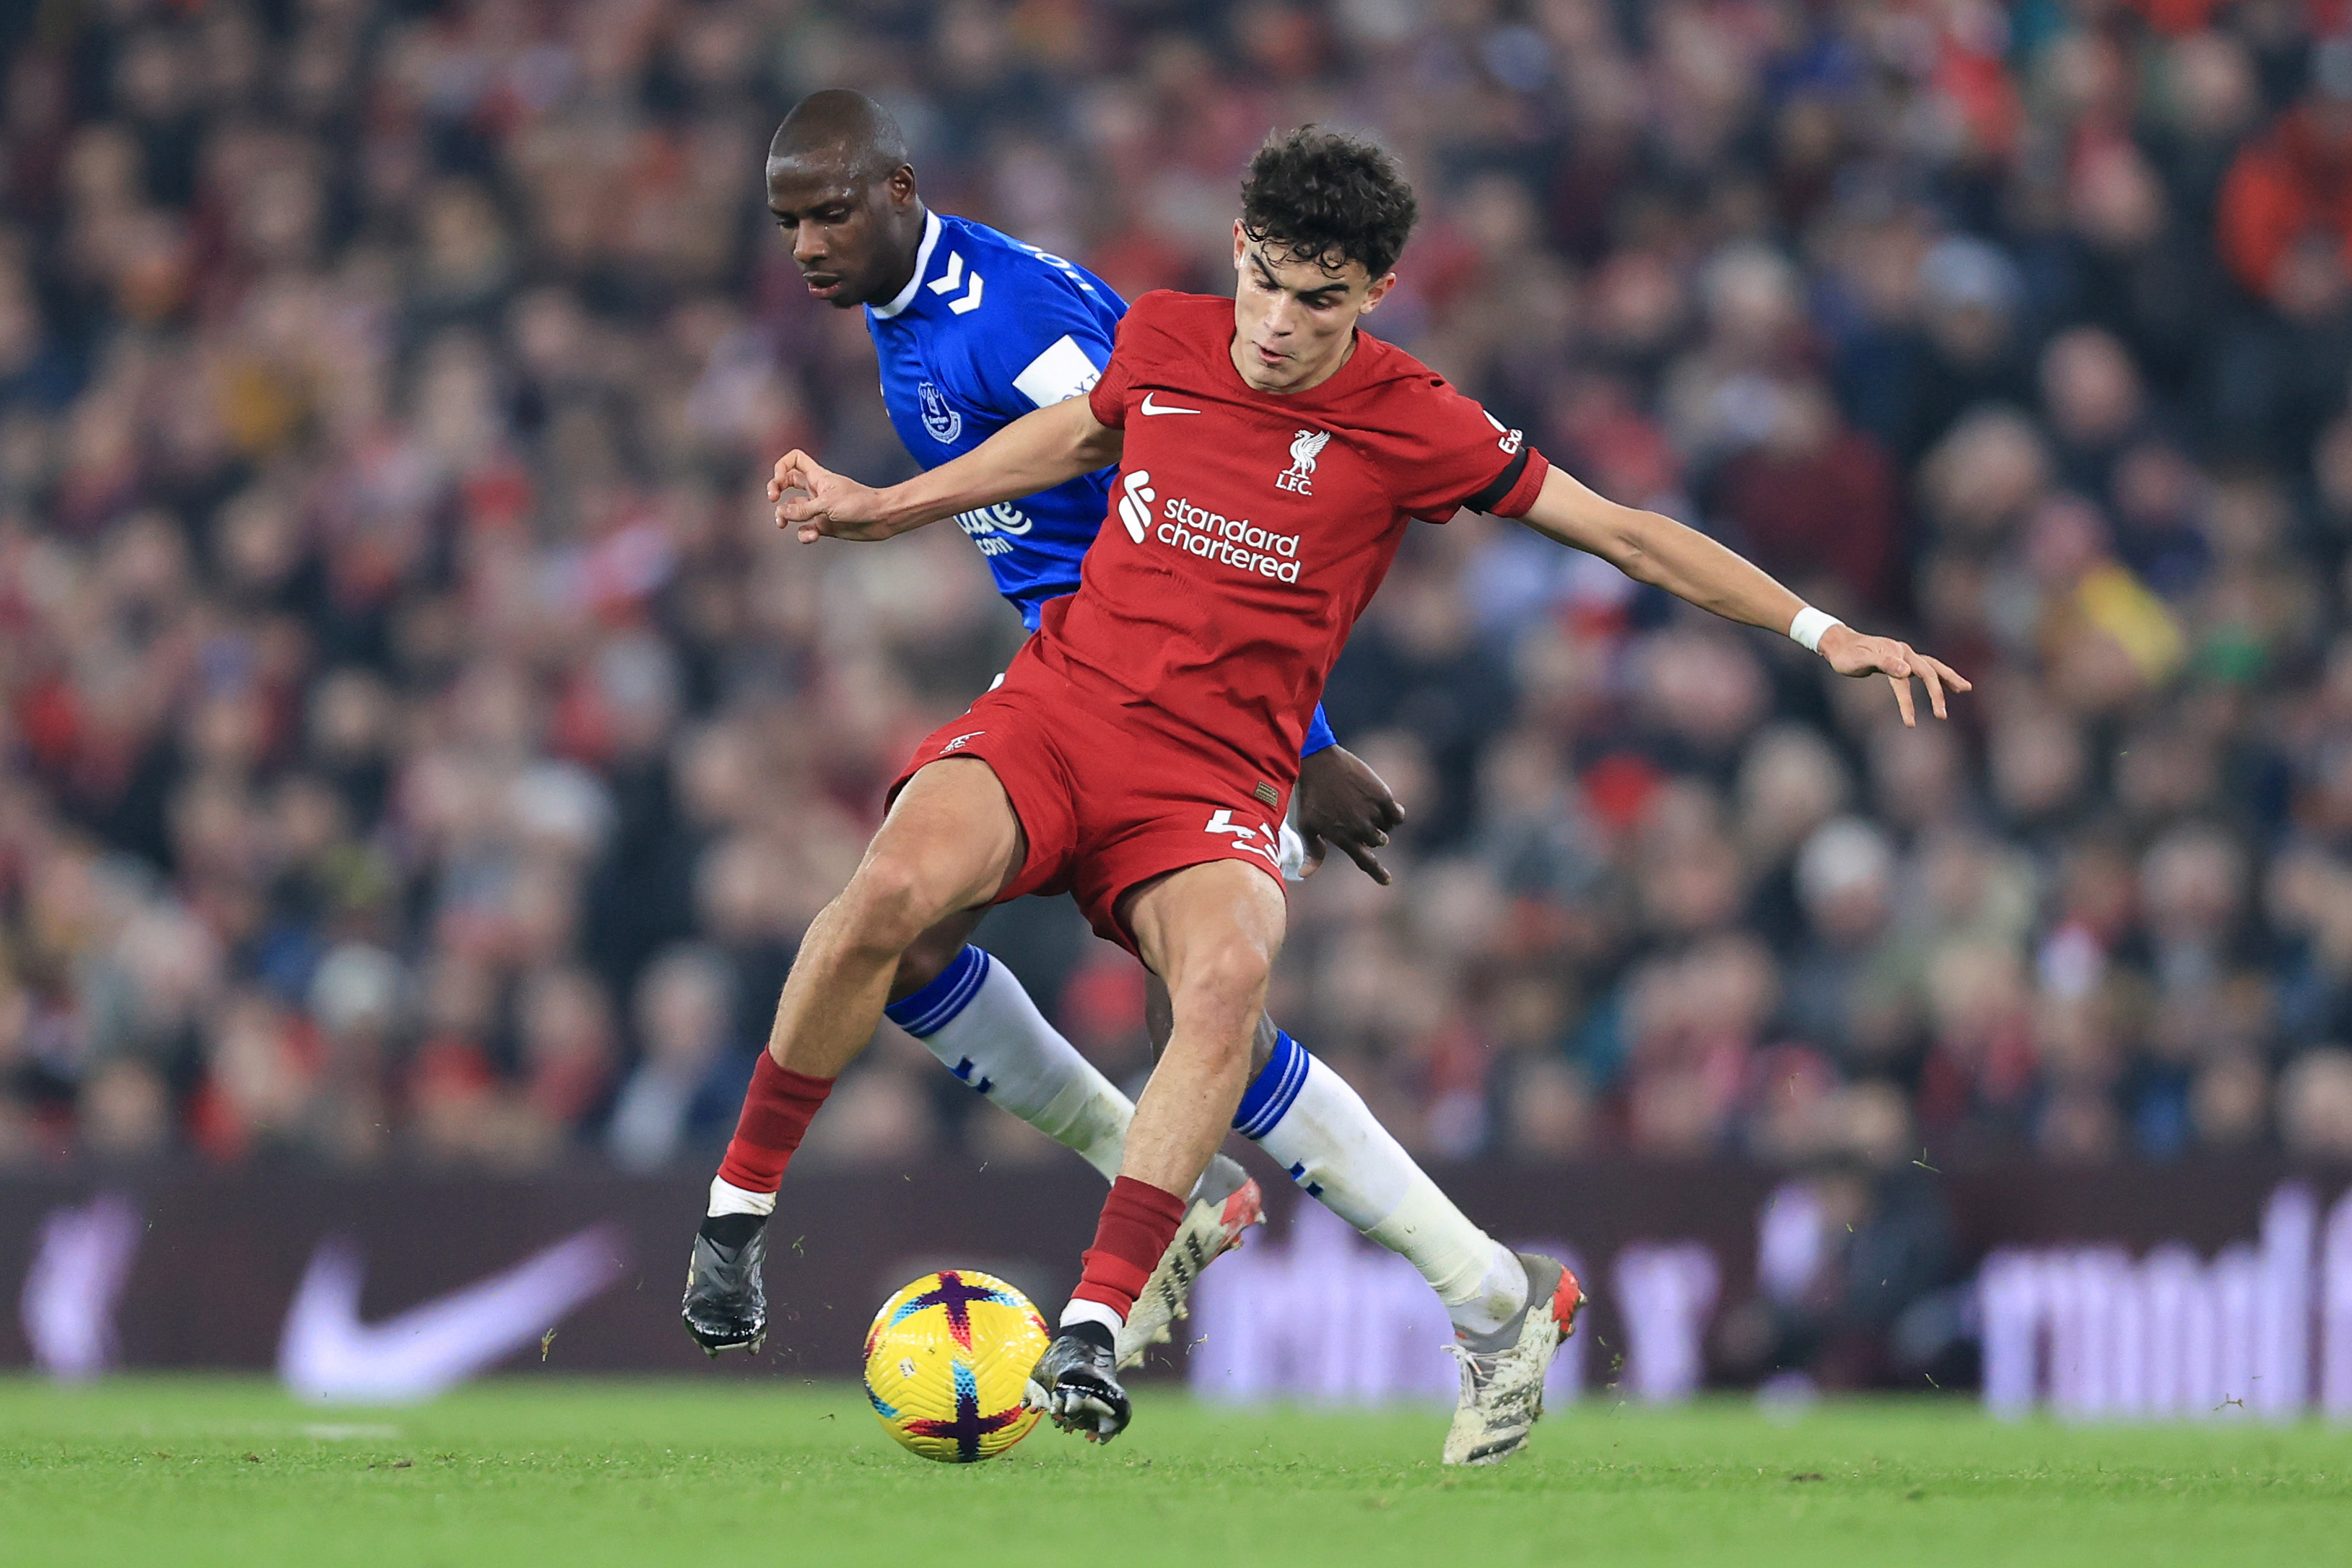 Stefan Bajcetic of Liverpool and Abdoulaye Doucoure of Everton during the Premier League match between Liverpool FC and Everton FC at Anfield on February 13, 2023 in Liverpool, United Kingdom.